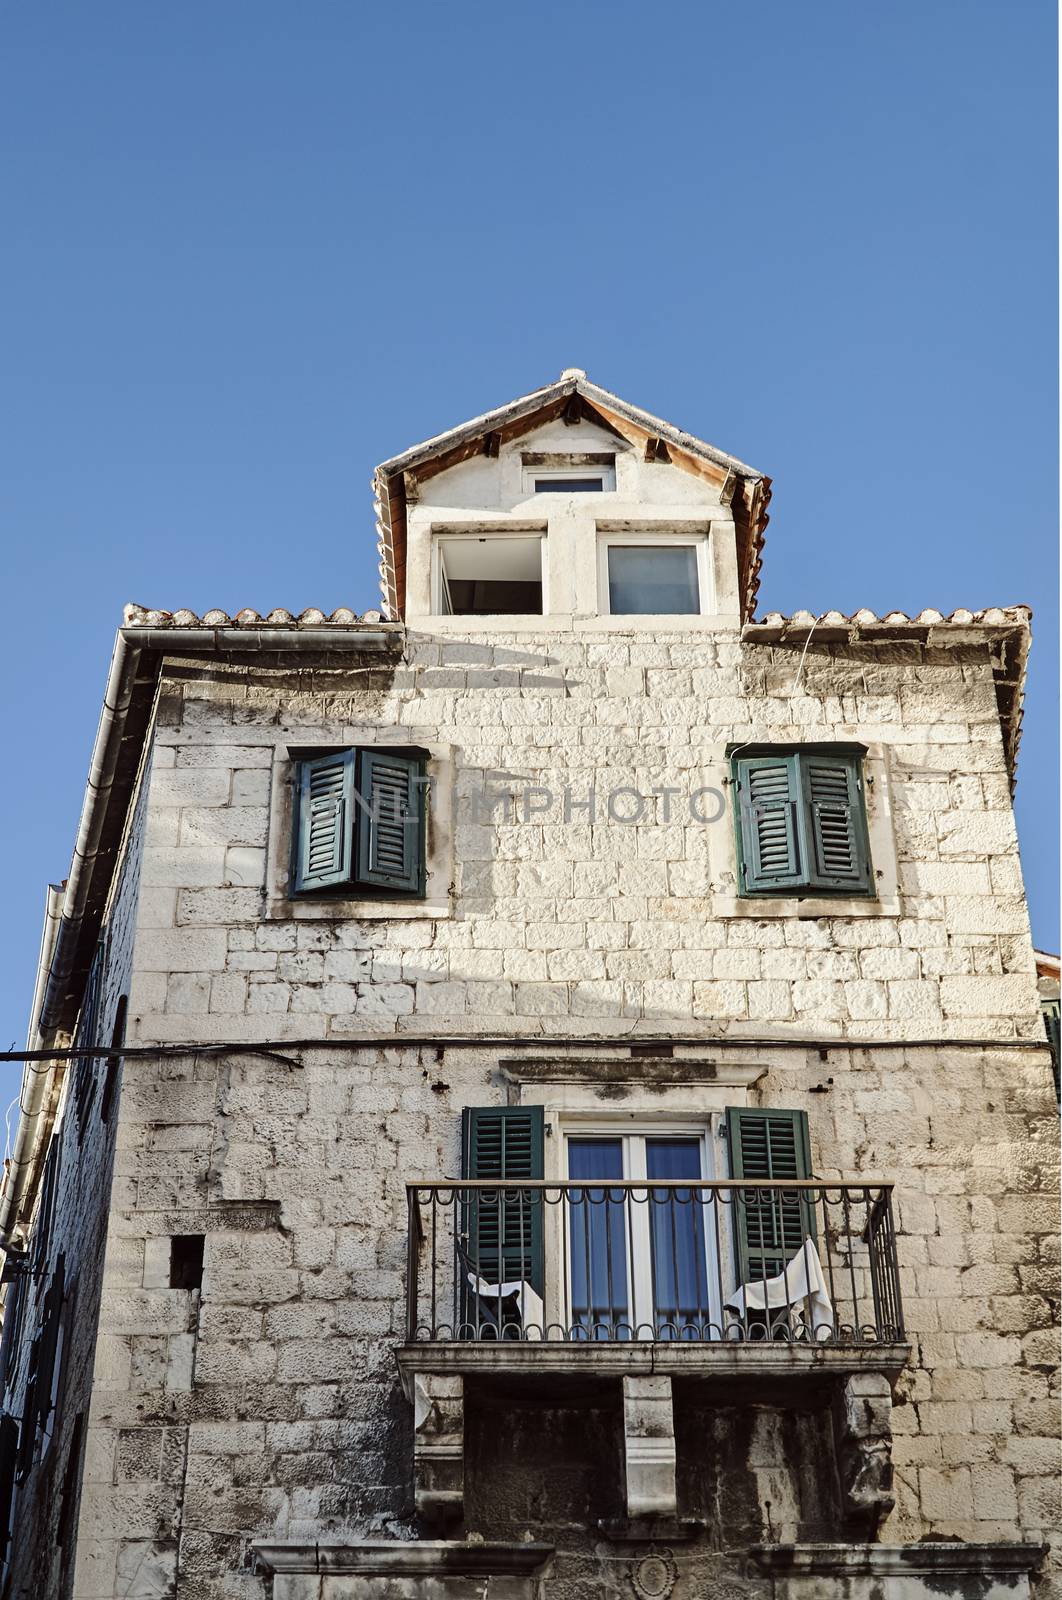 Stone house with balcony in the city of Split in Croatia